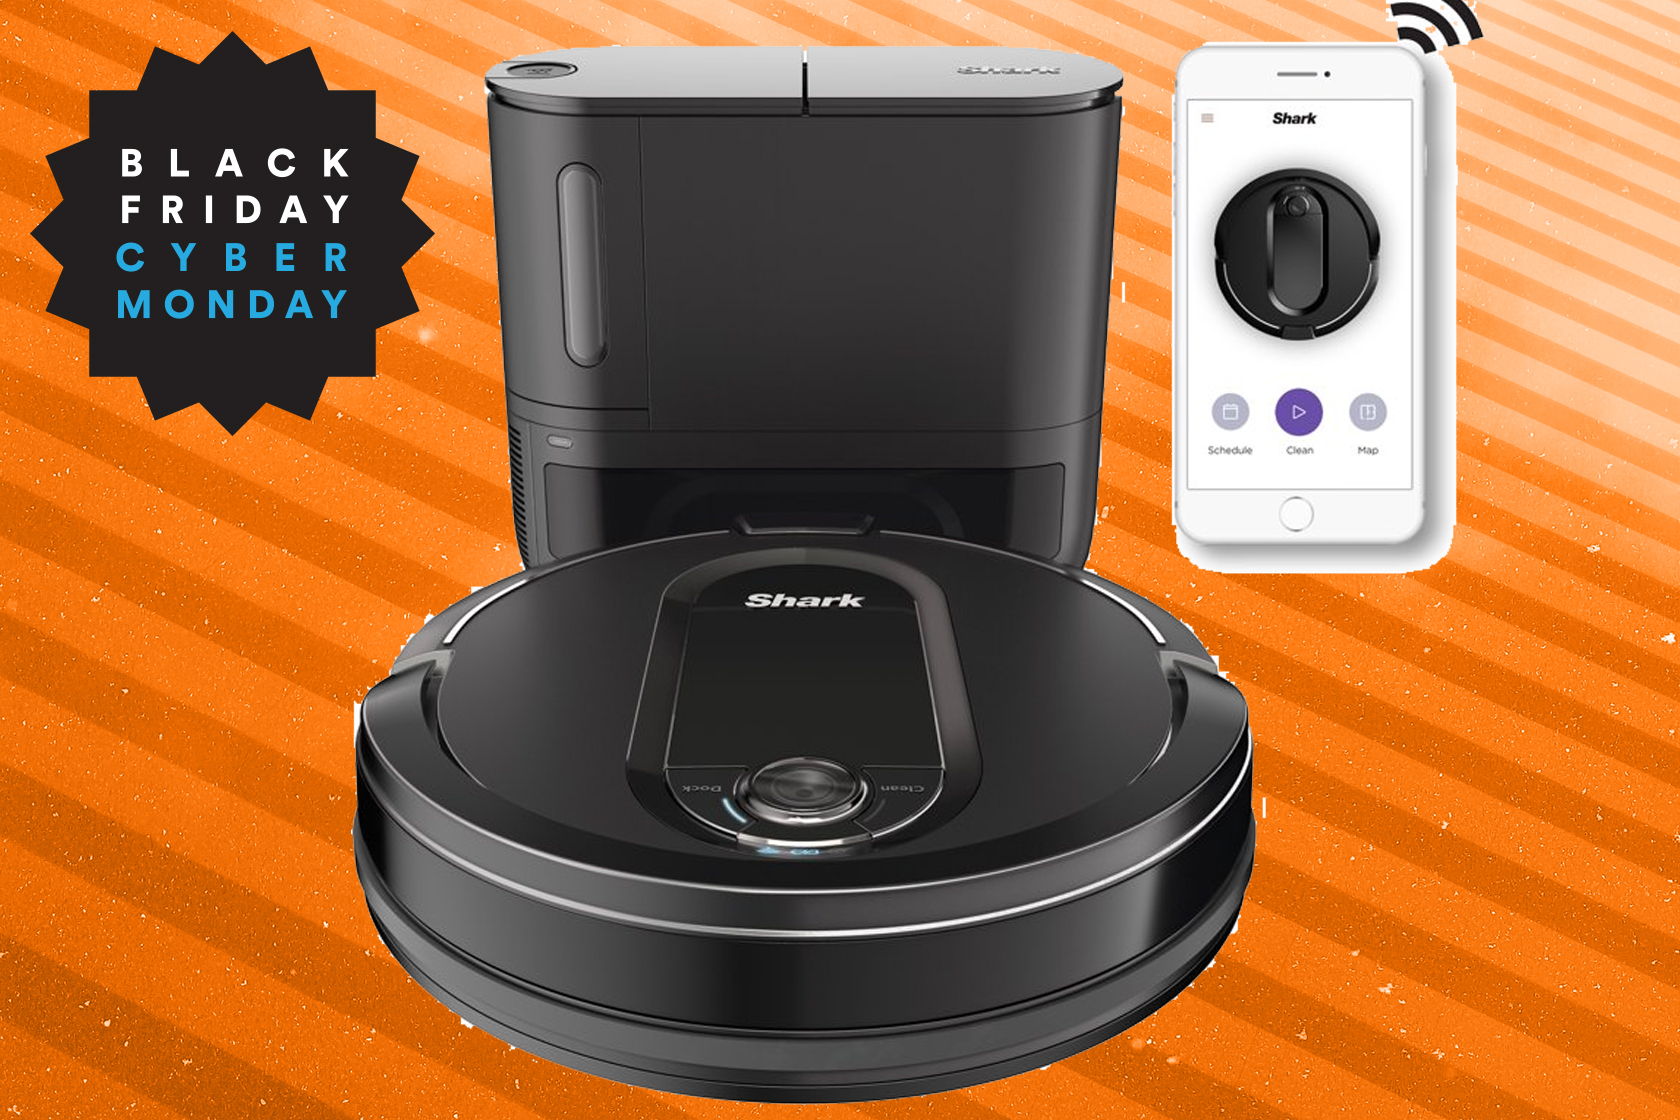 The Shark IQ Robot Vacuum is for Black Friday at Walmart